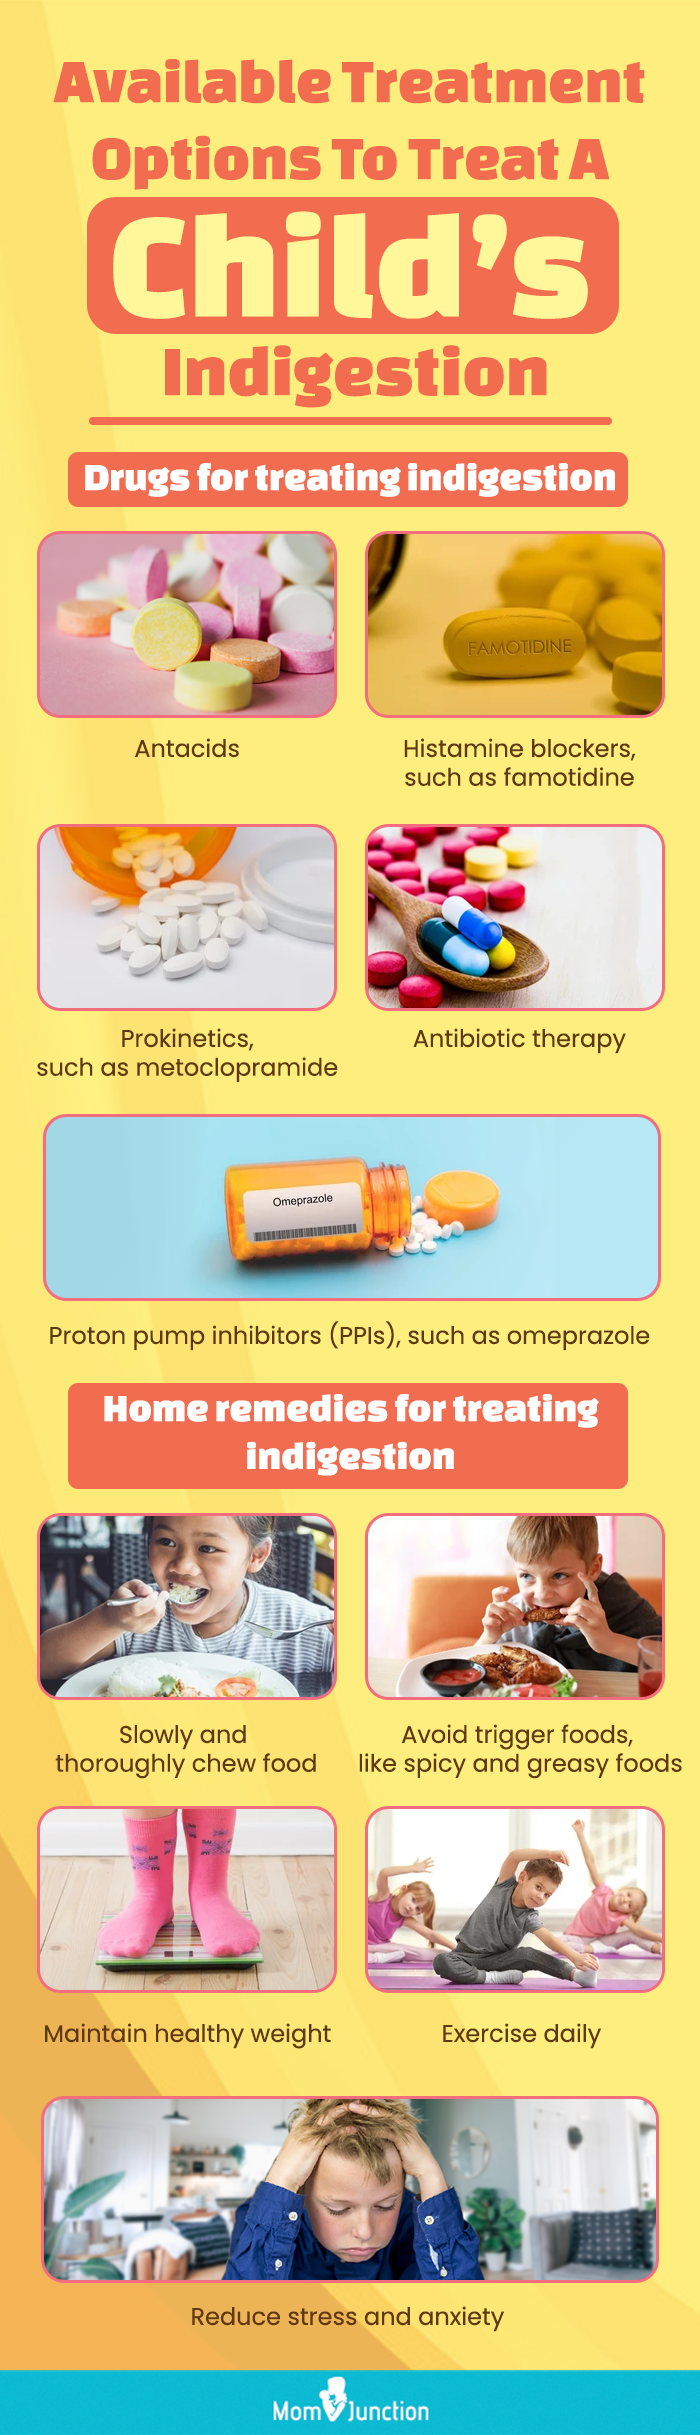 available treatment options to treat a childs indigestion [infographic]